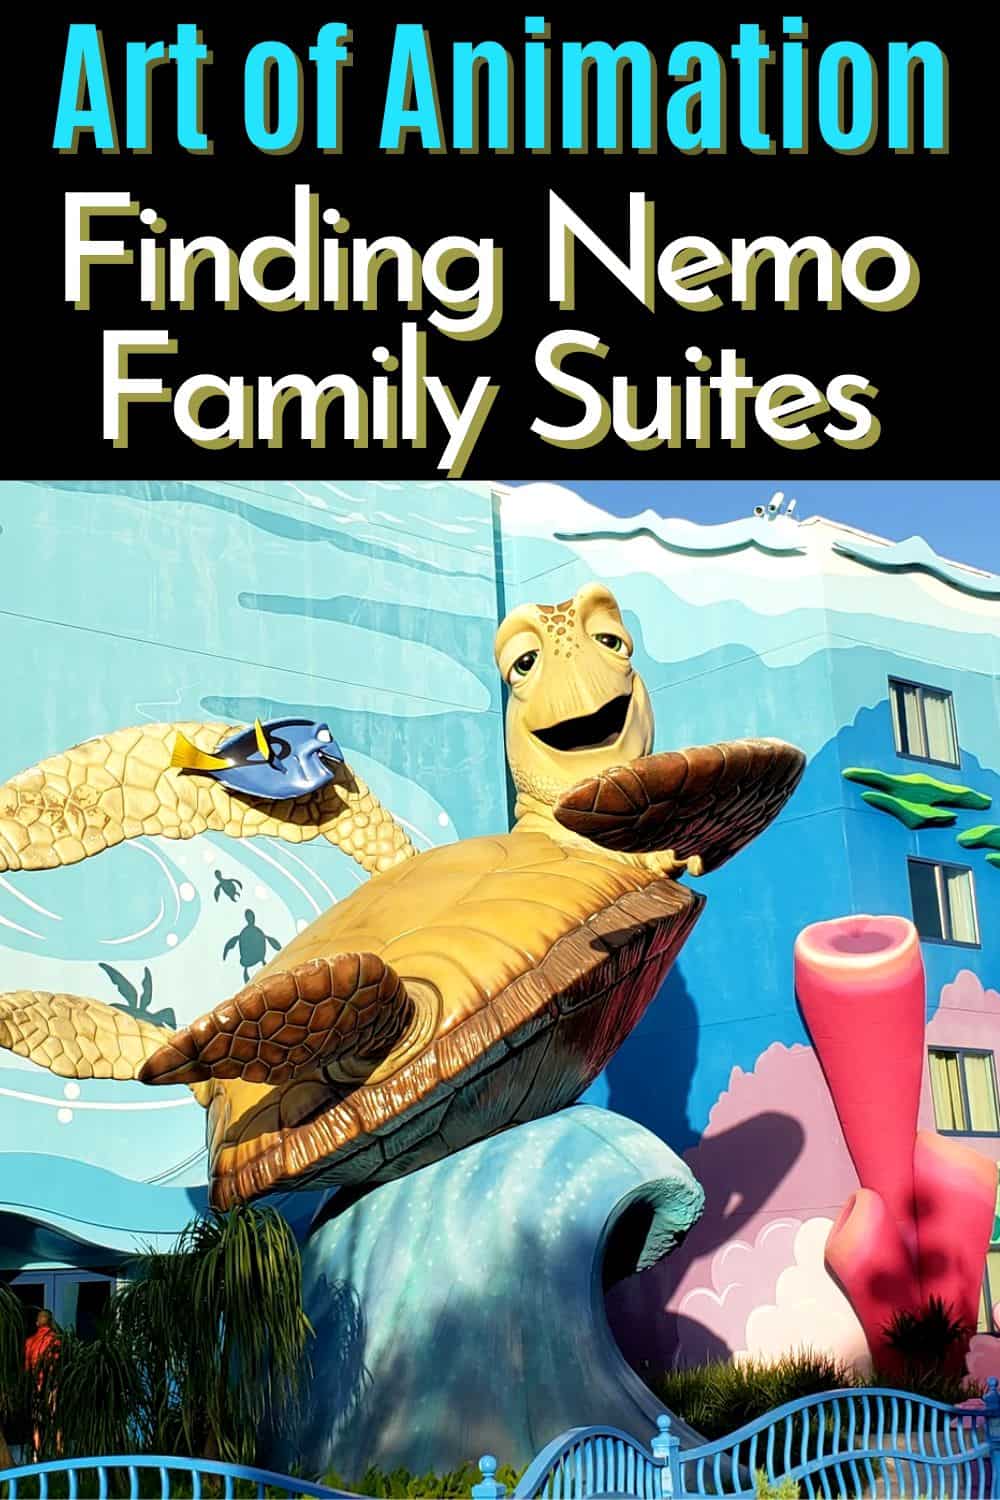 Art of Animation Finding Nemo Family Suites